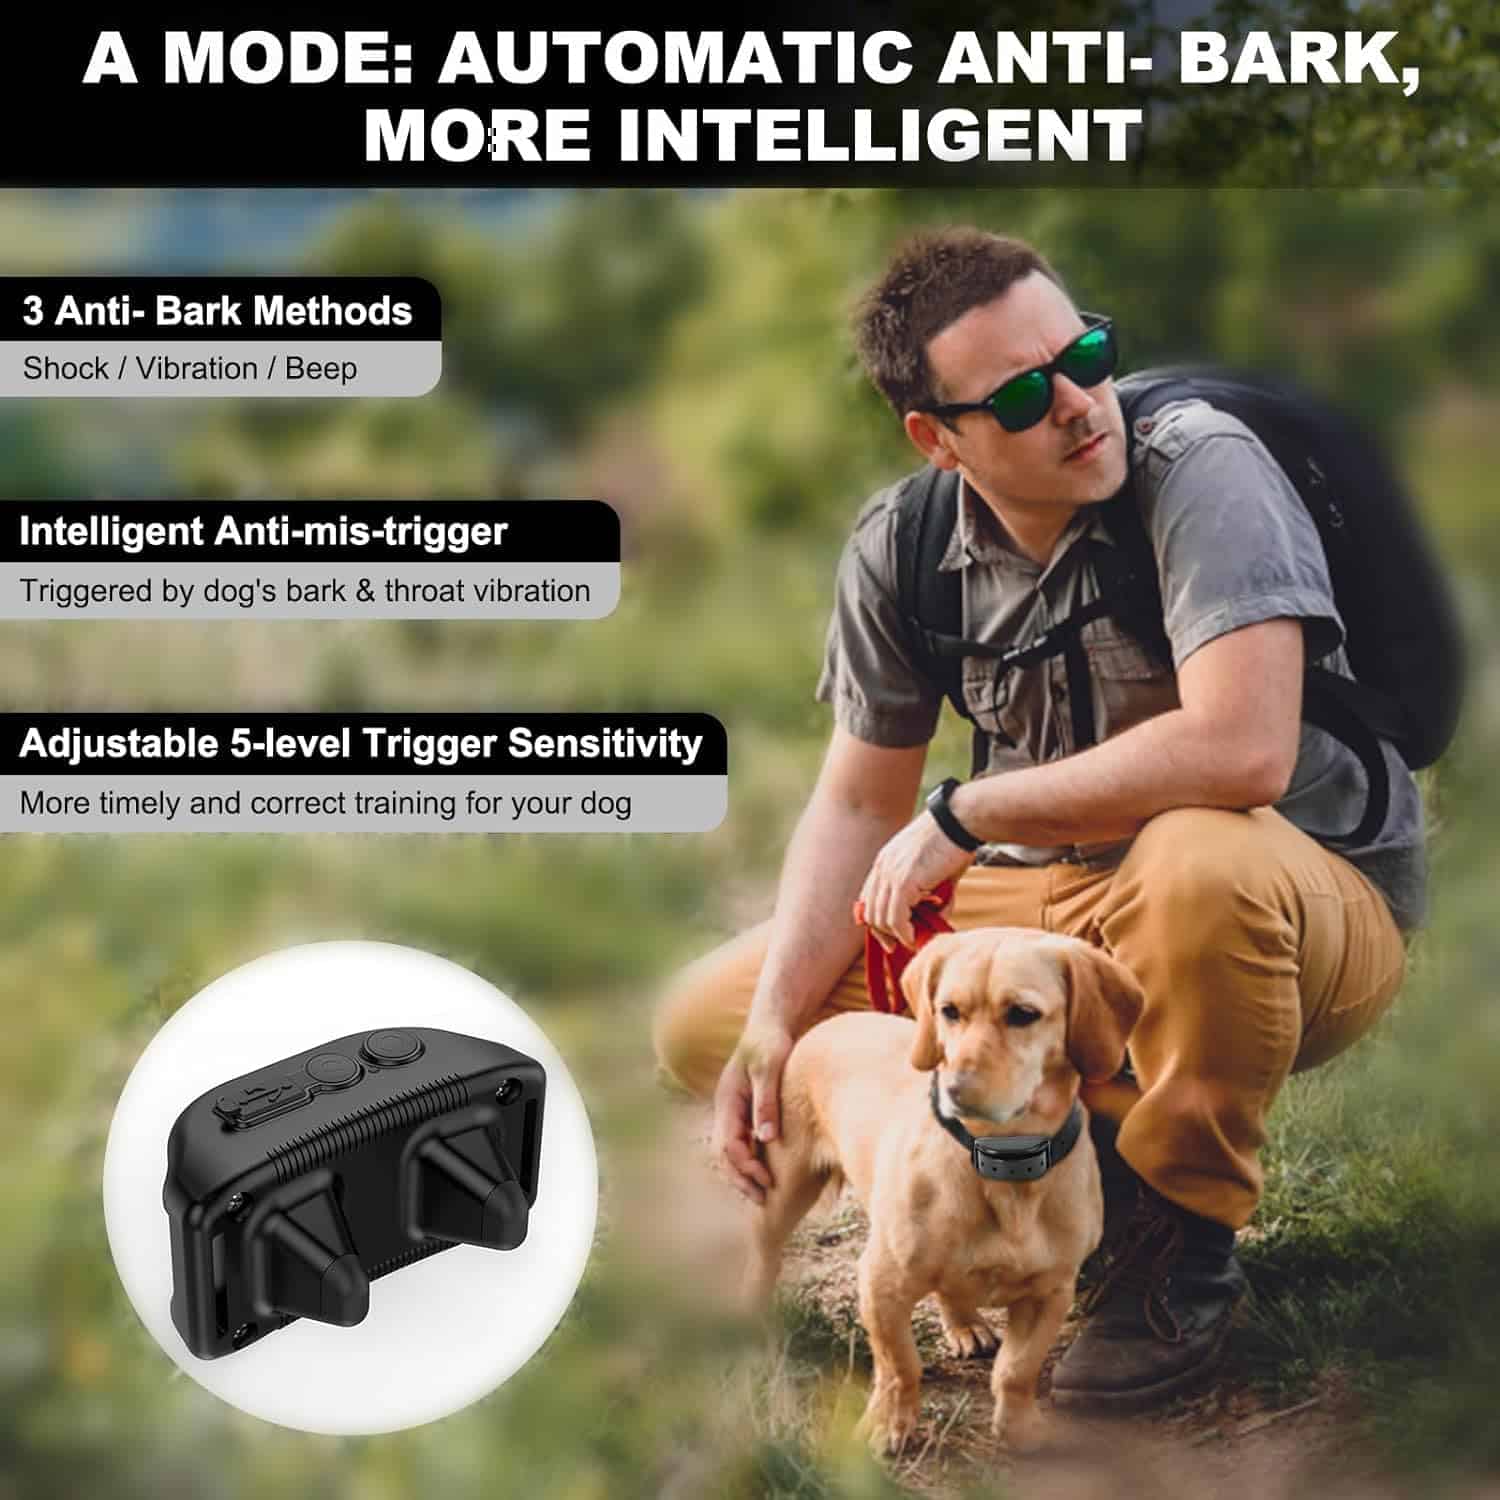 Professional 2 in 1 Bark Collar - The Ultimate Dog Training Solution